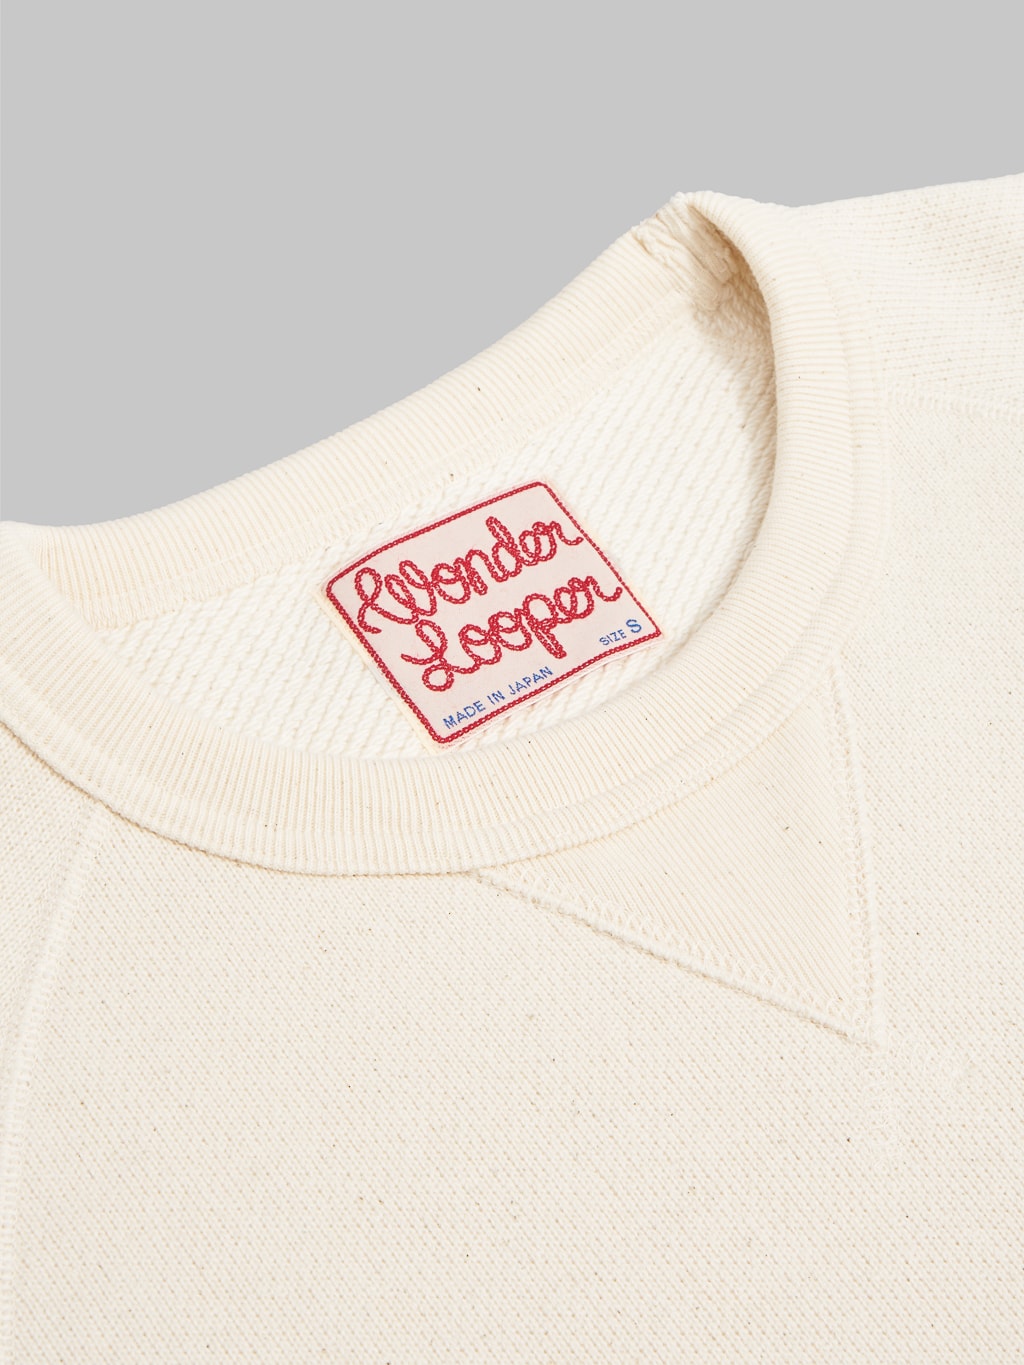 Wonder Looper Pullover Crewneck Double Heavyweight French Terry Ecru athletic interior label